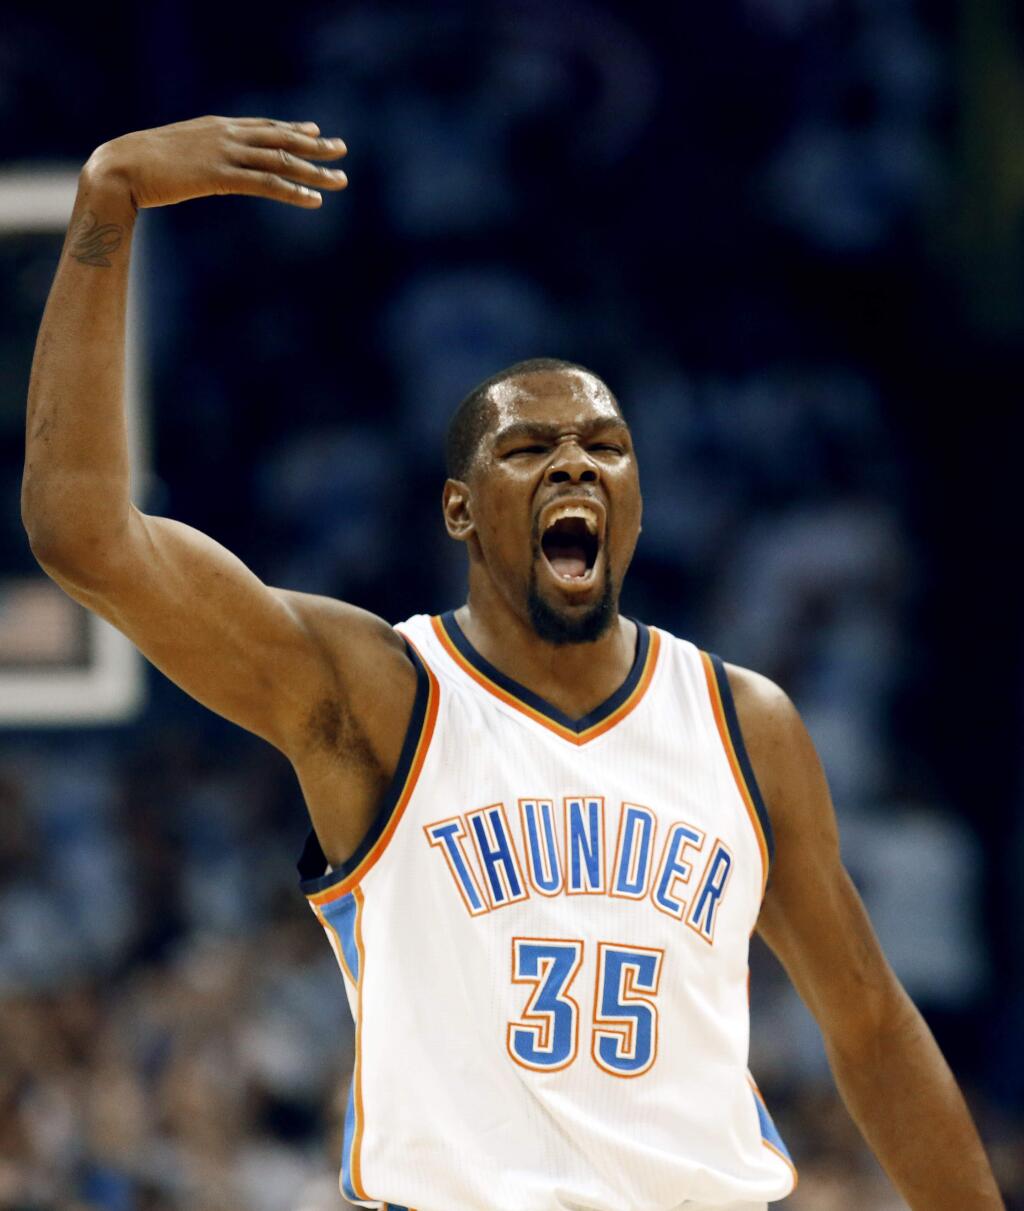 Oklahoma City Thunder forward Kevin Durant (35) celebrate against the Golden State Warriors during the first quarter in Game 3 of the NBA basketball Western Conference finals in Oklahoma City, Sunday, May 22, 2016. (AP Photo/Sue Ogrocki)